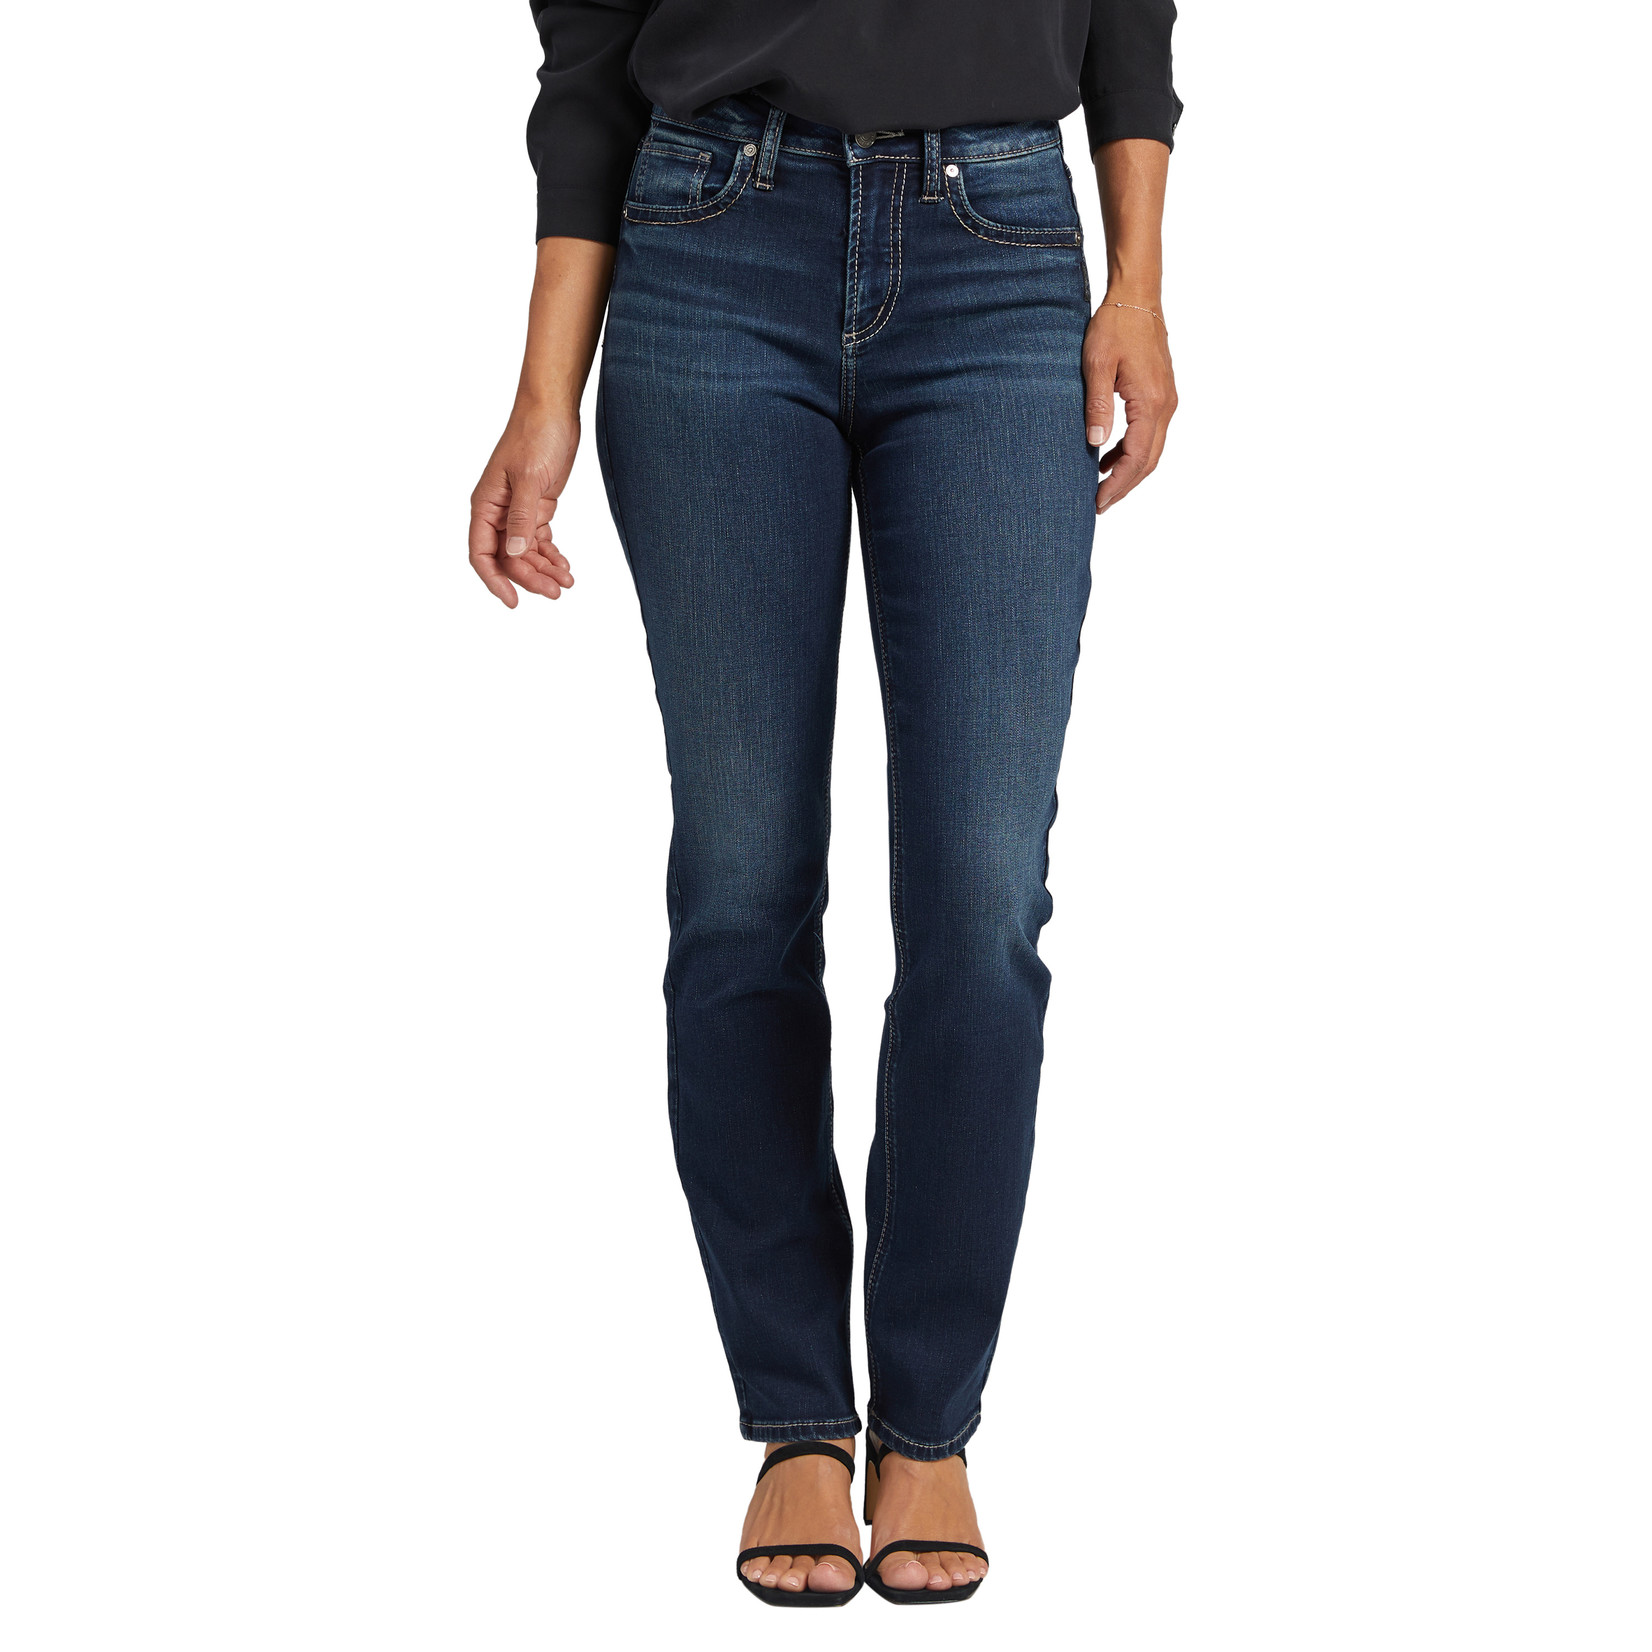 Silver Silver Jeans  Avery high rise straight leg jean